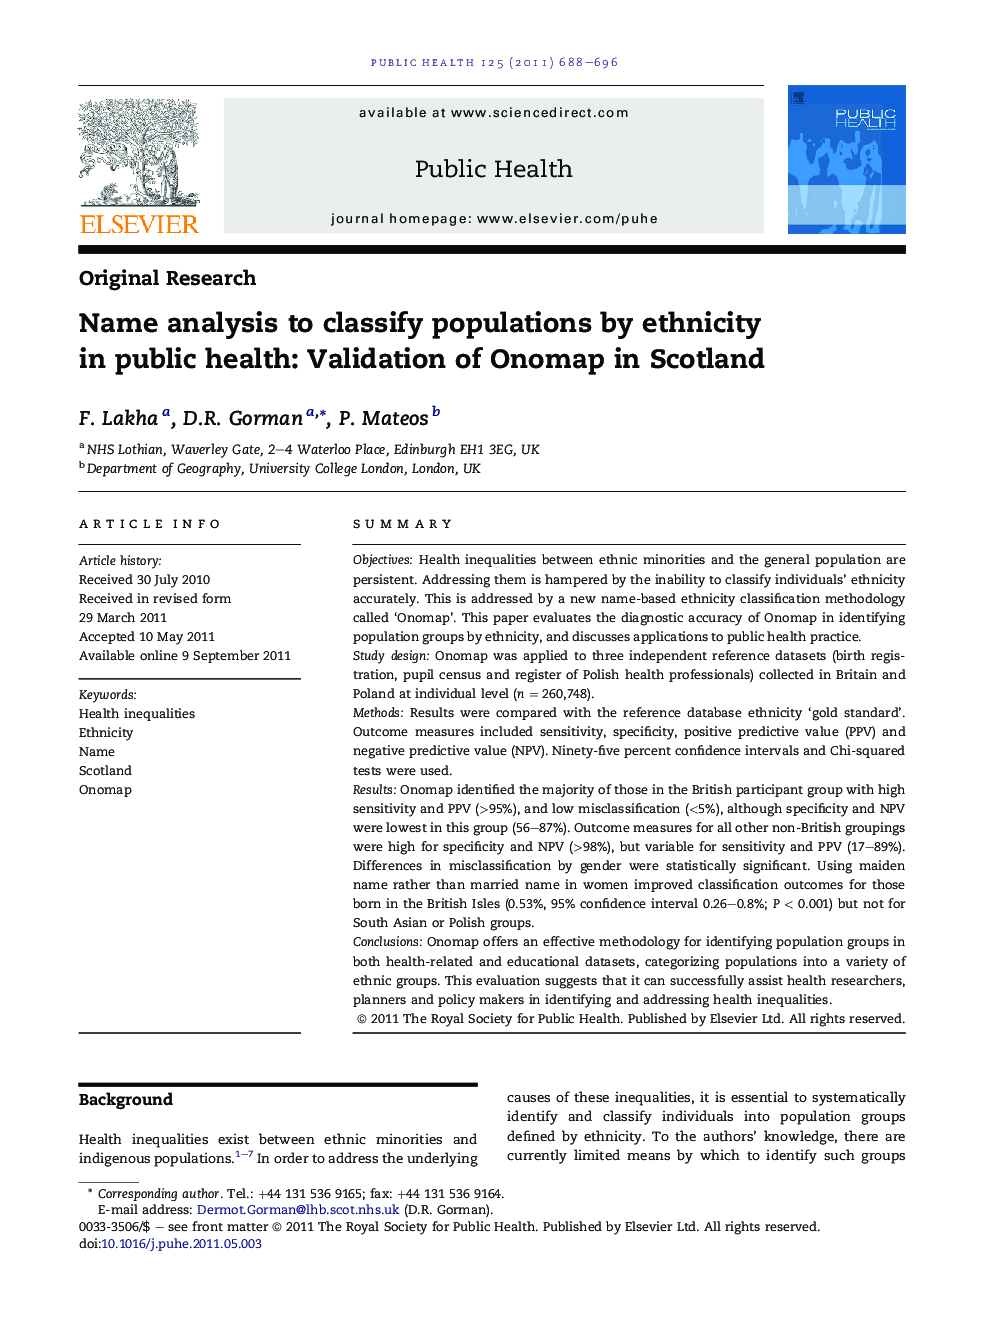 Name analysis to classify populations by ethnicity in public health: Validation of Onomap in Scotland